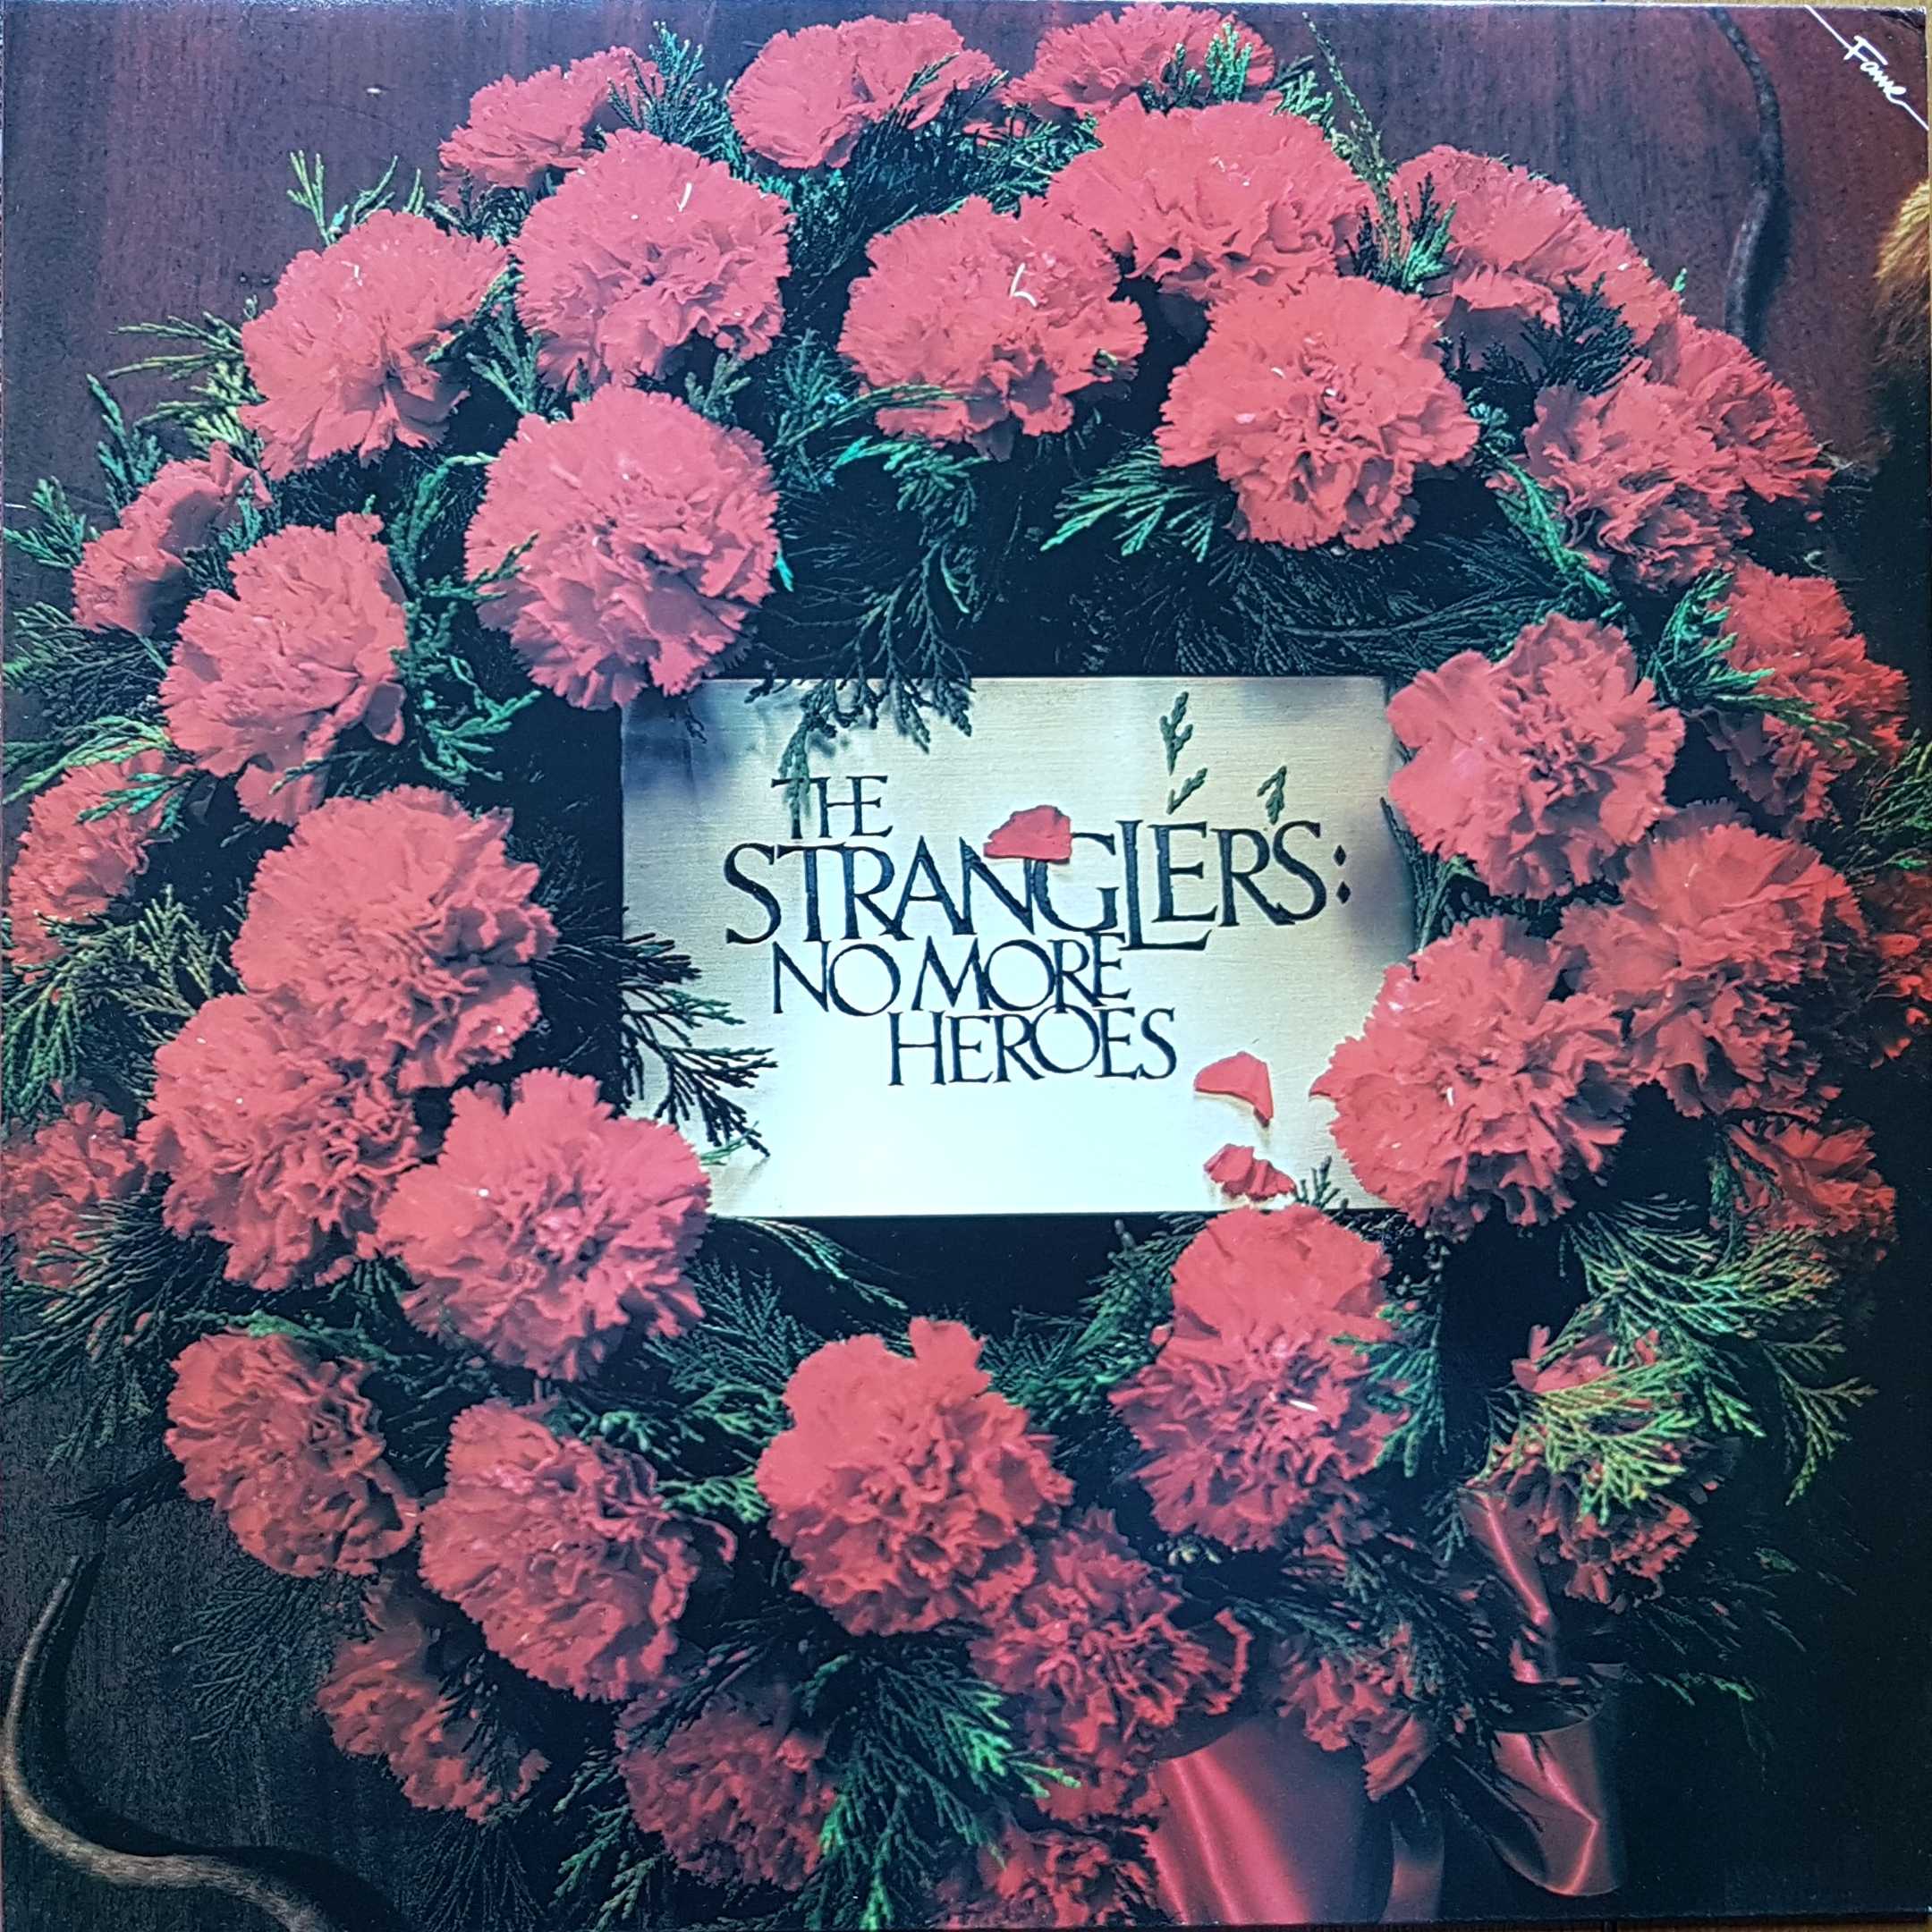 Picture of FA 3190 No more heroes by artist The Stranglers  from The Stranglers